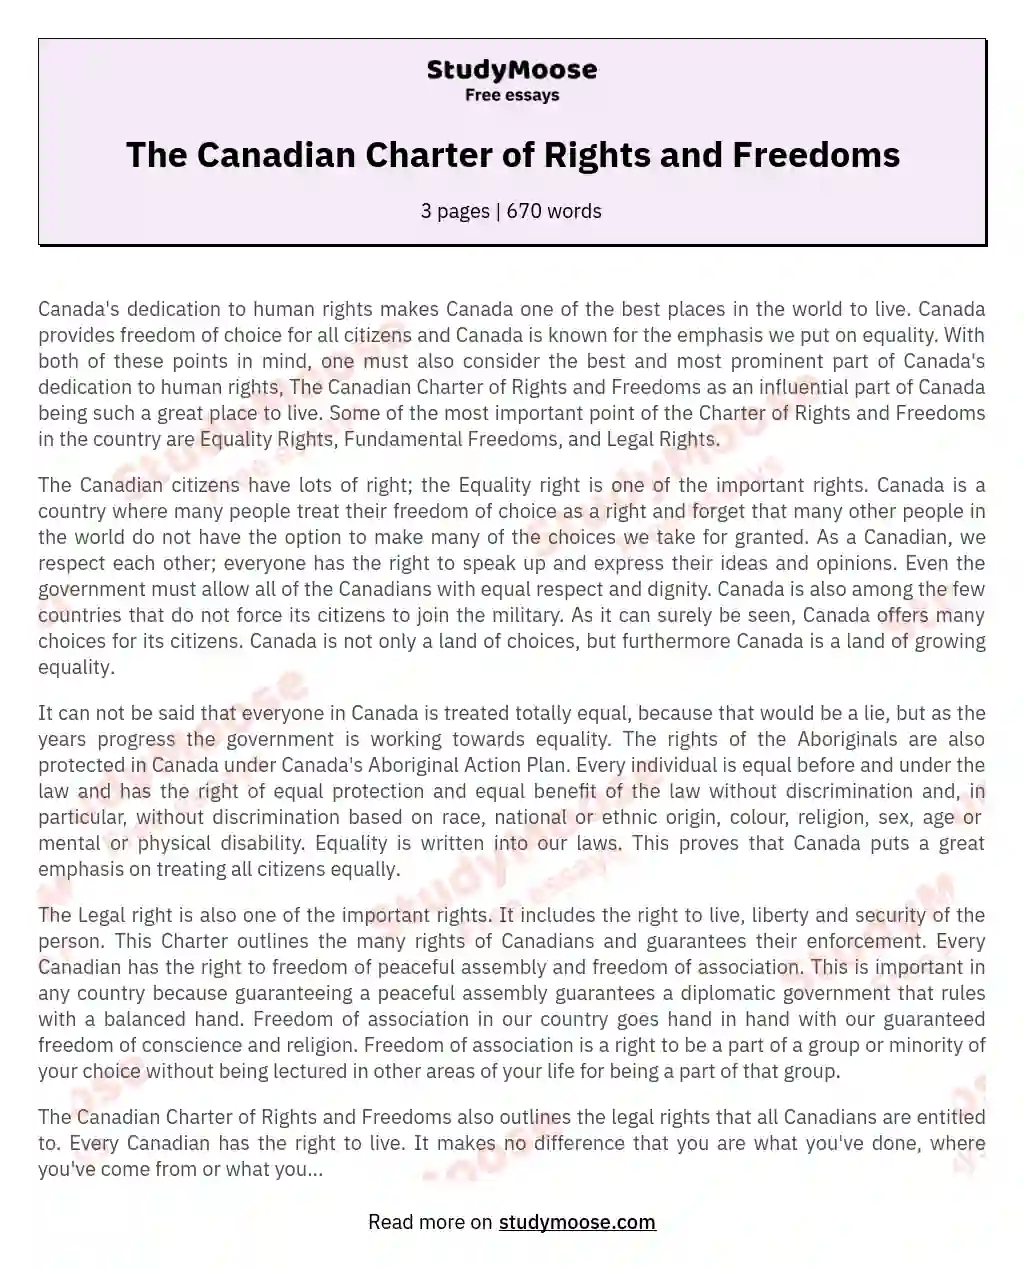 The Canadian Charter of Rights and Freedoms essay